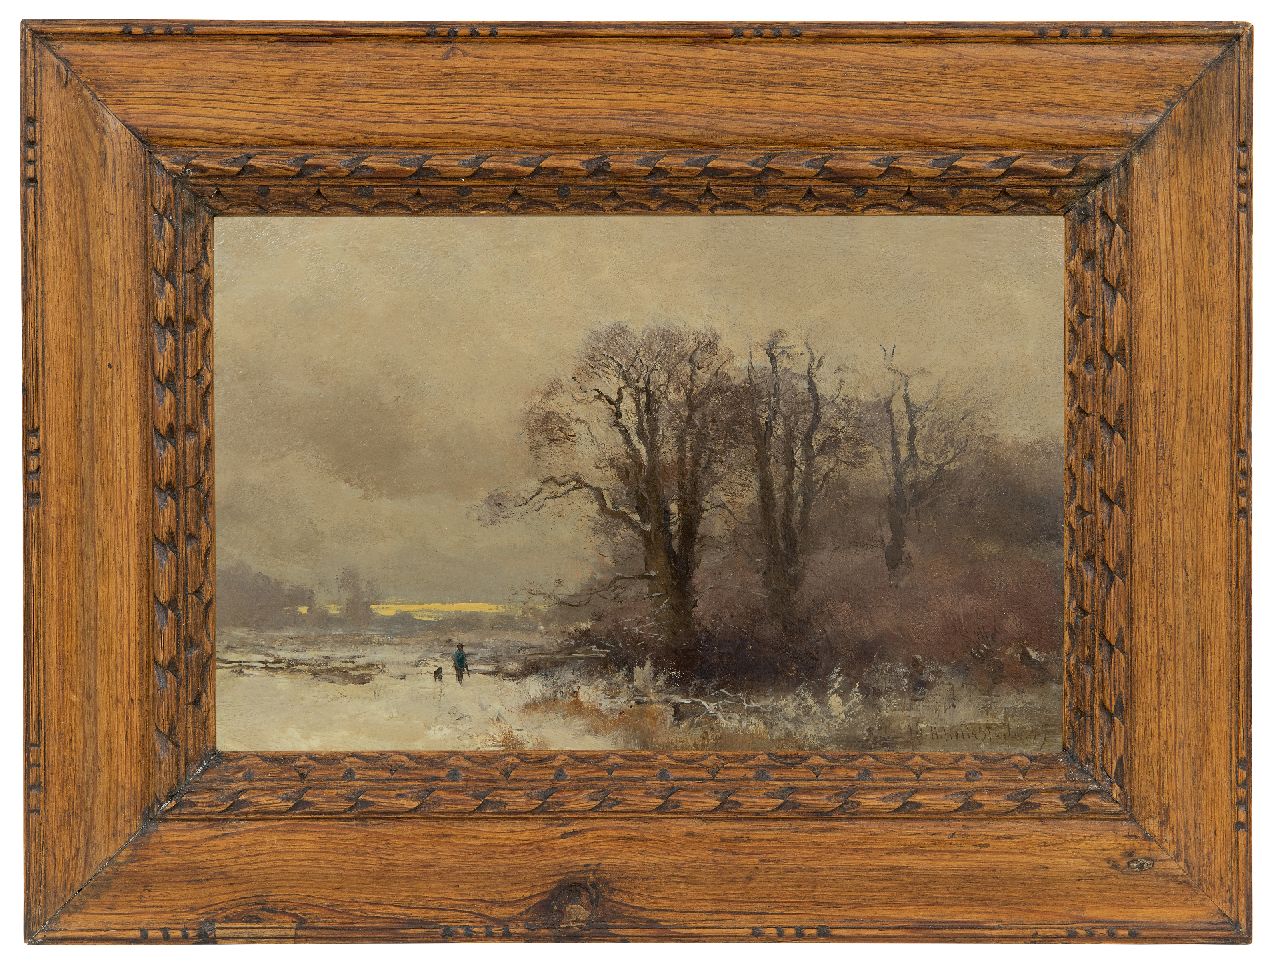 Hollestelle J.H.  | Jacob Huijbrecht Hollestelle | Paintings offered for sale | Hunter and his dog in a snowy landscape, oil on panel 20.5 x 31.6 cm, signed l.r. and dated '99